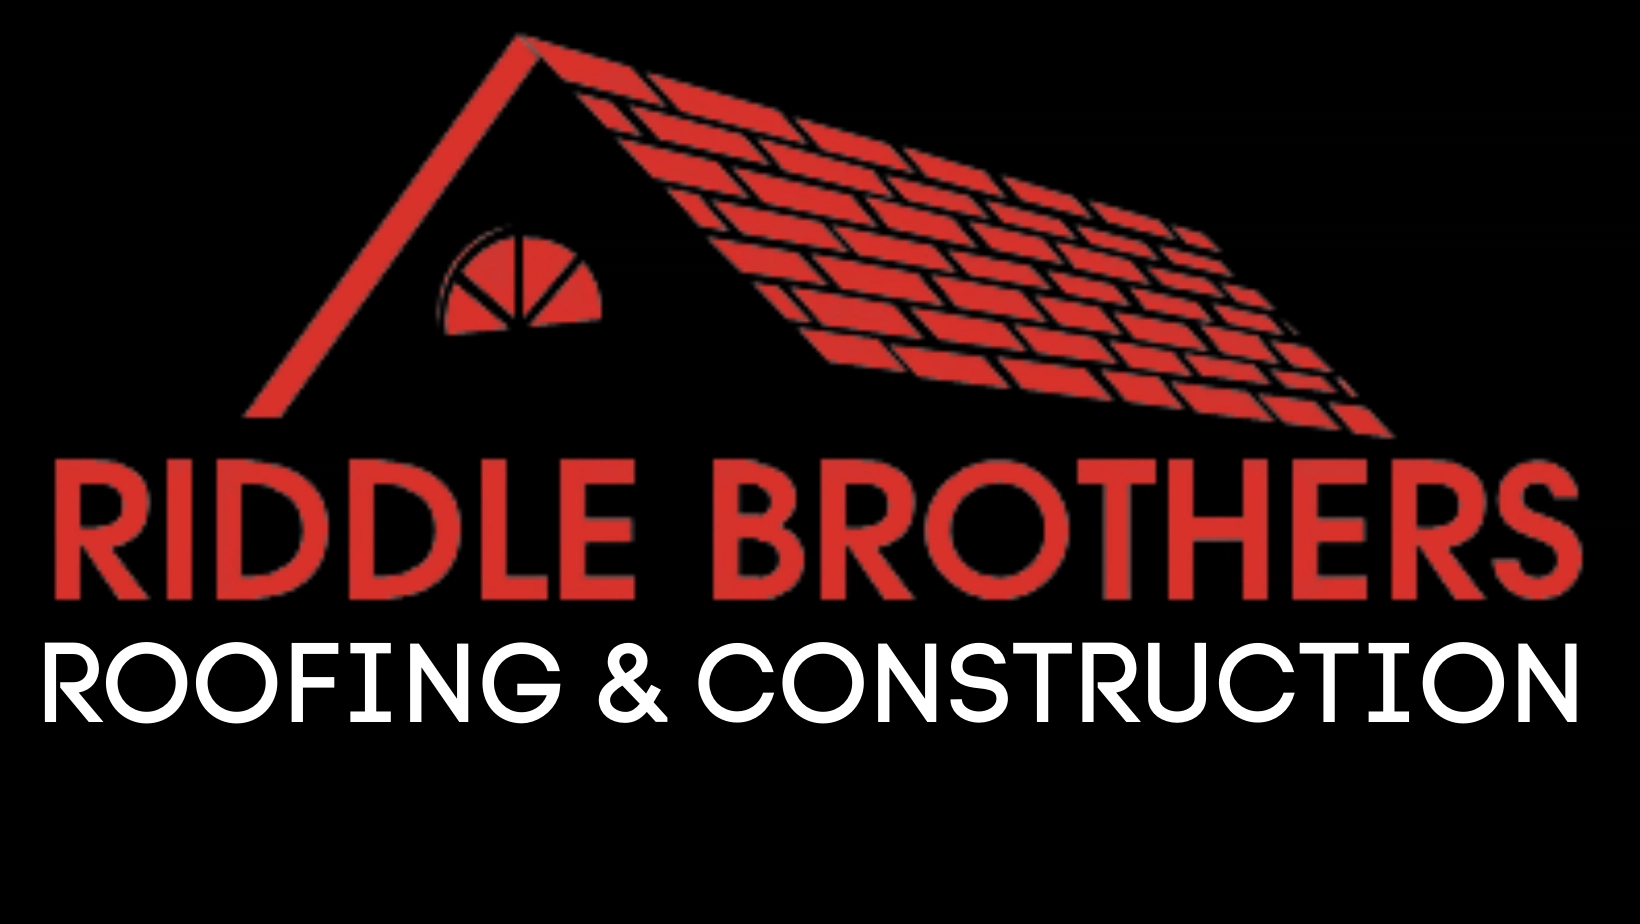 Riddle Brothers Roofing & Construction Logo